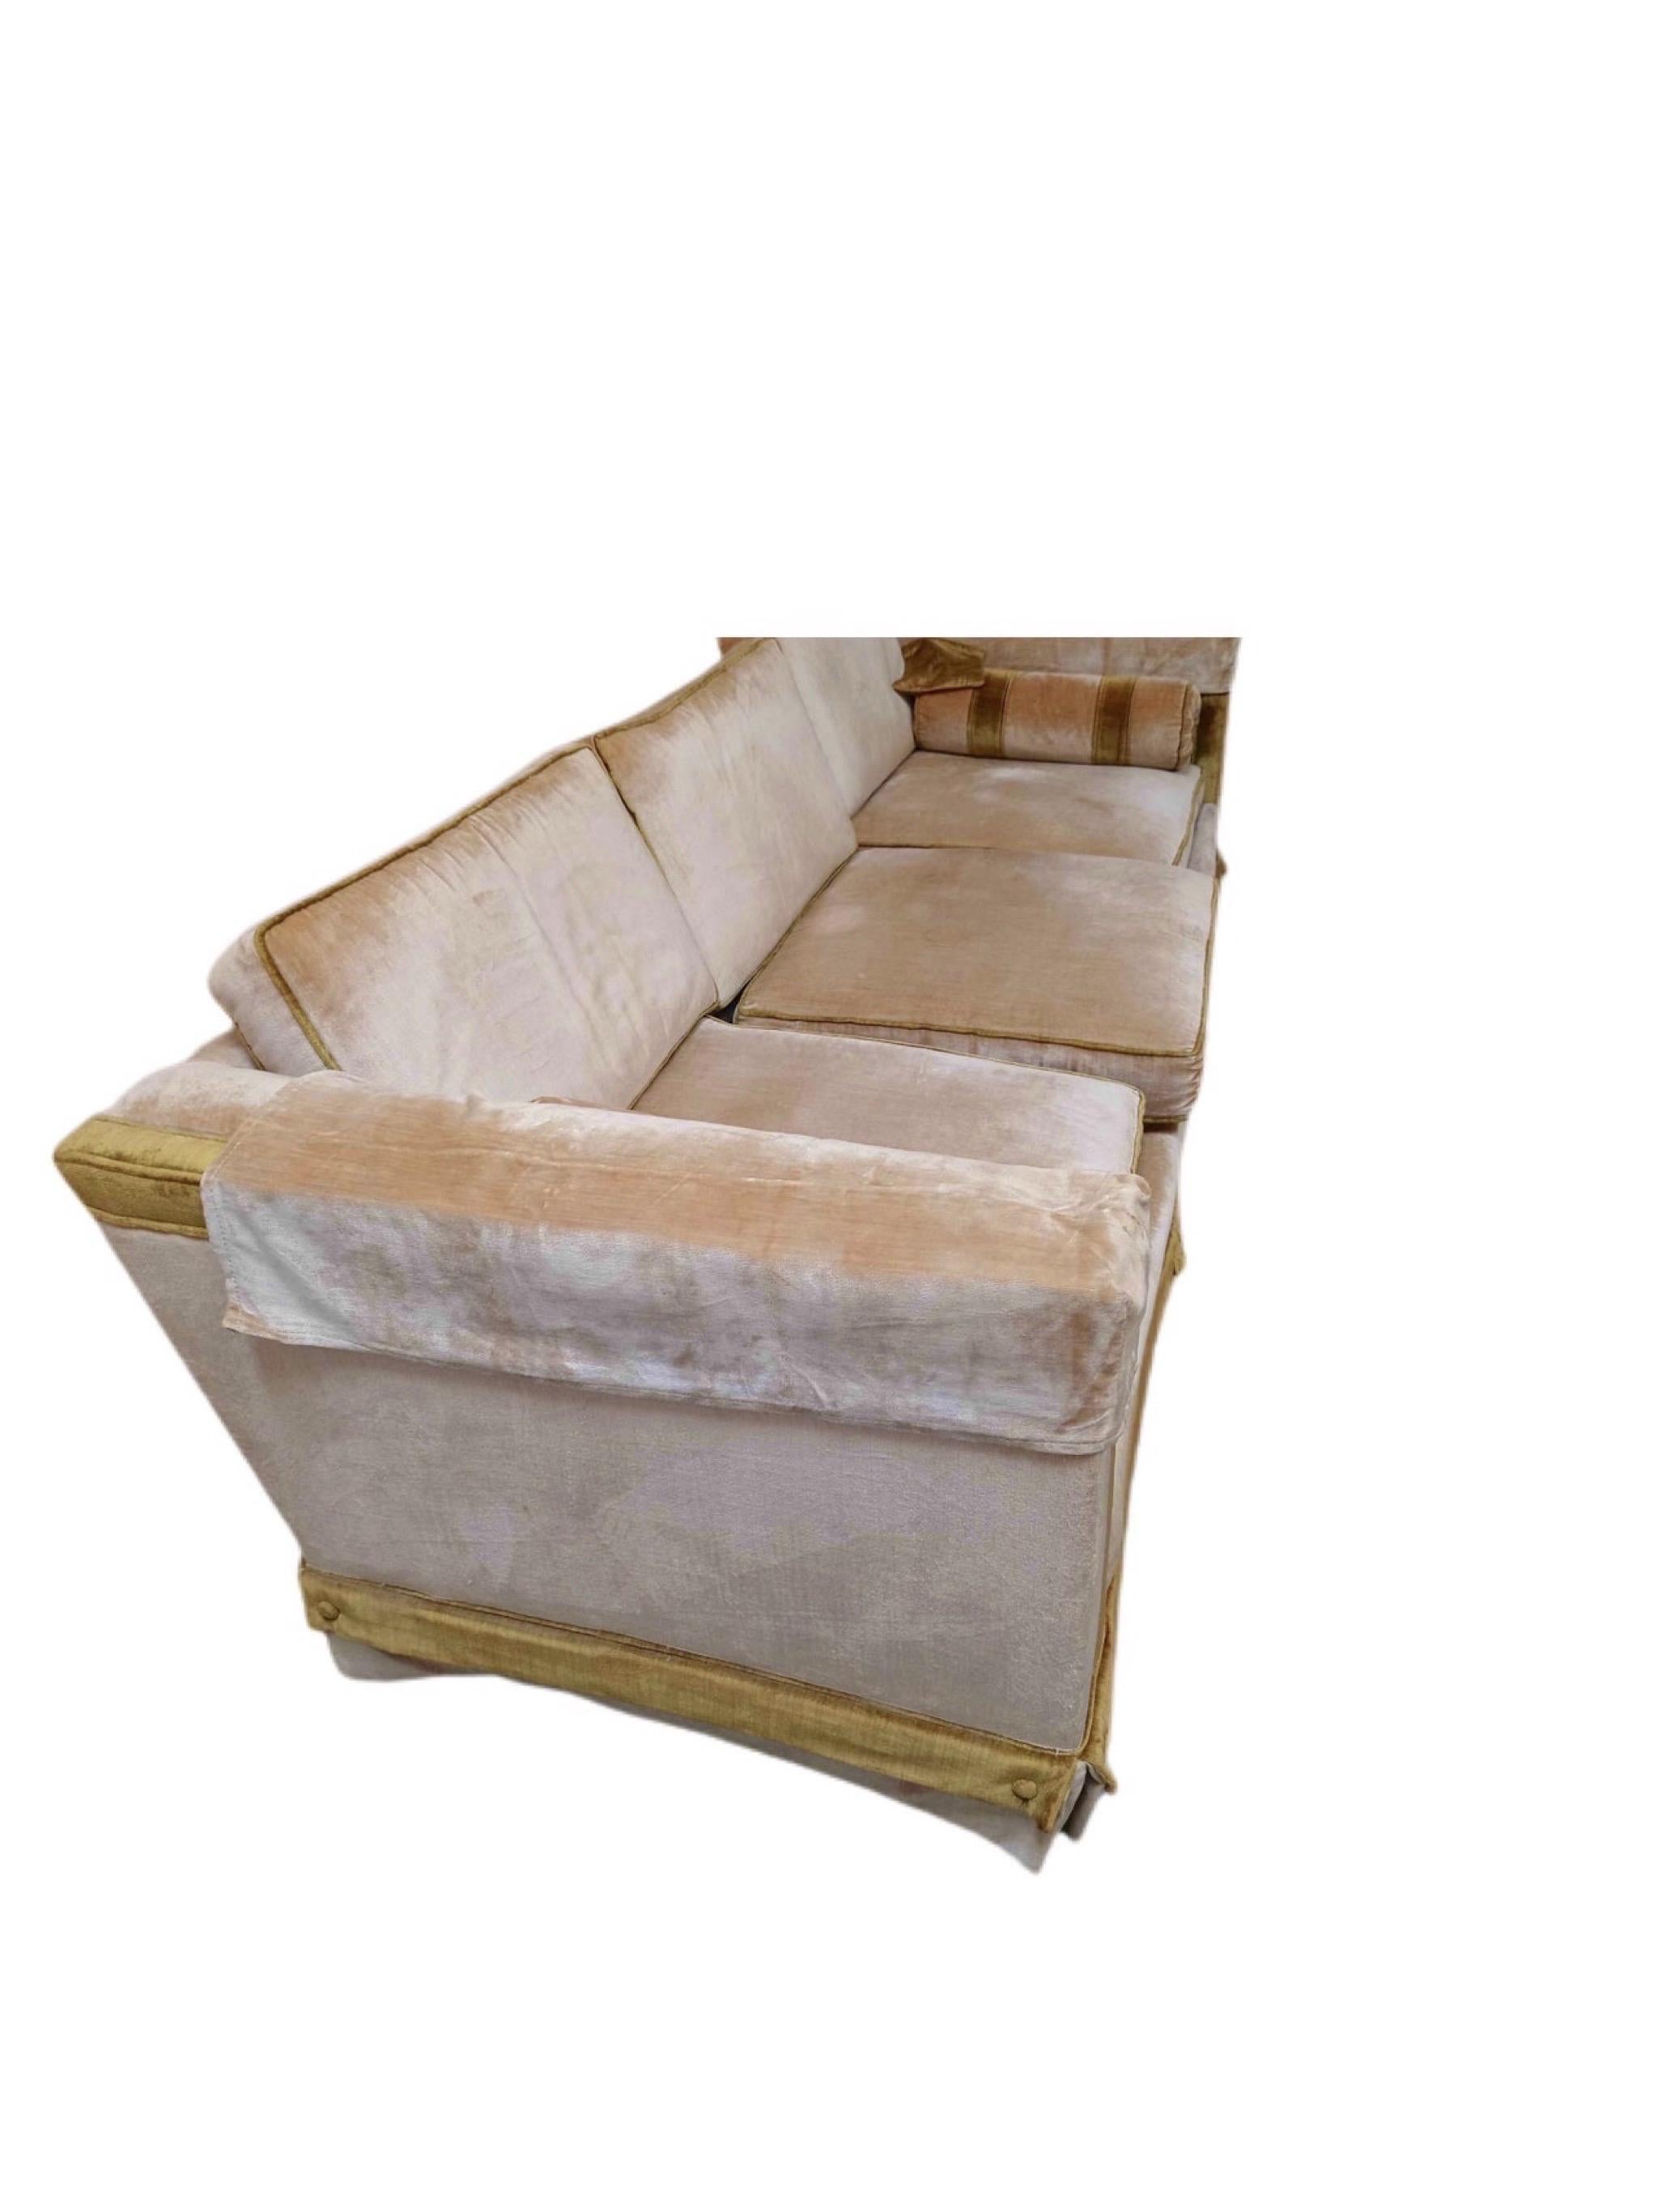 This exceptional piece of furniture is tuxedo style, with custom upholstery. It is upholstered in a pale peach with a green trim. This 3 cushion sofa can easily translate to fit into most decorating styles. It can be glamorous and chic or funky